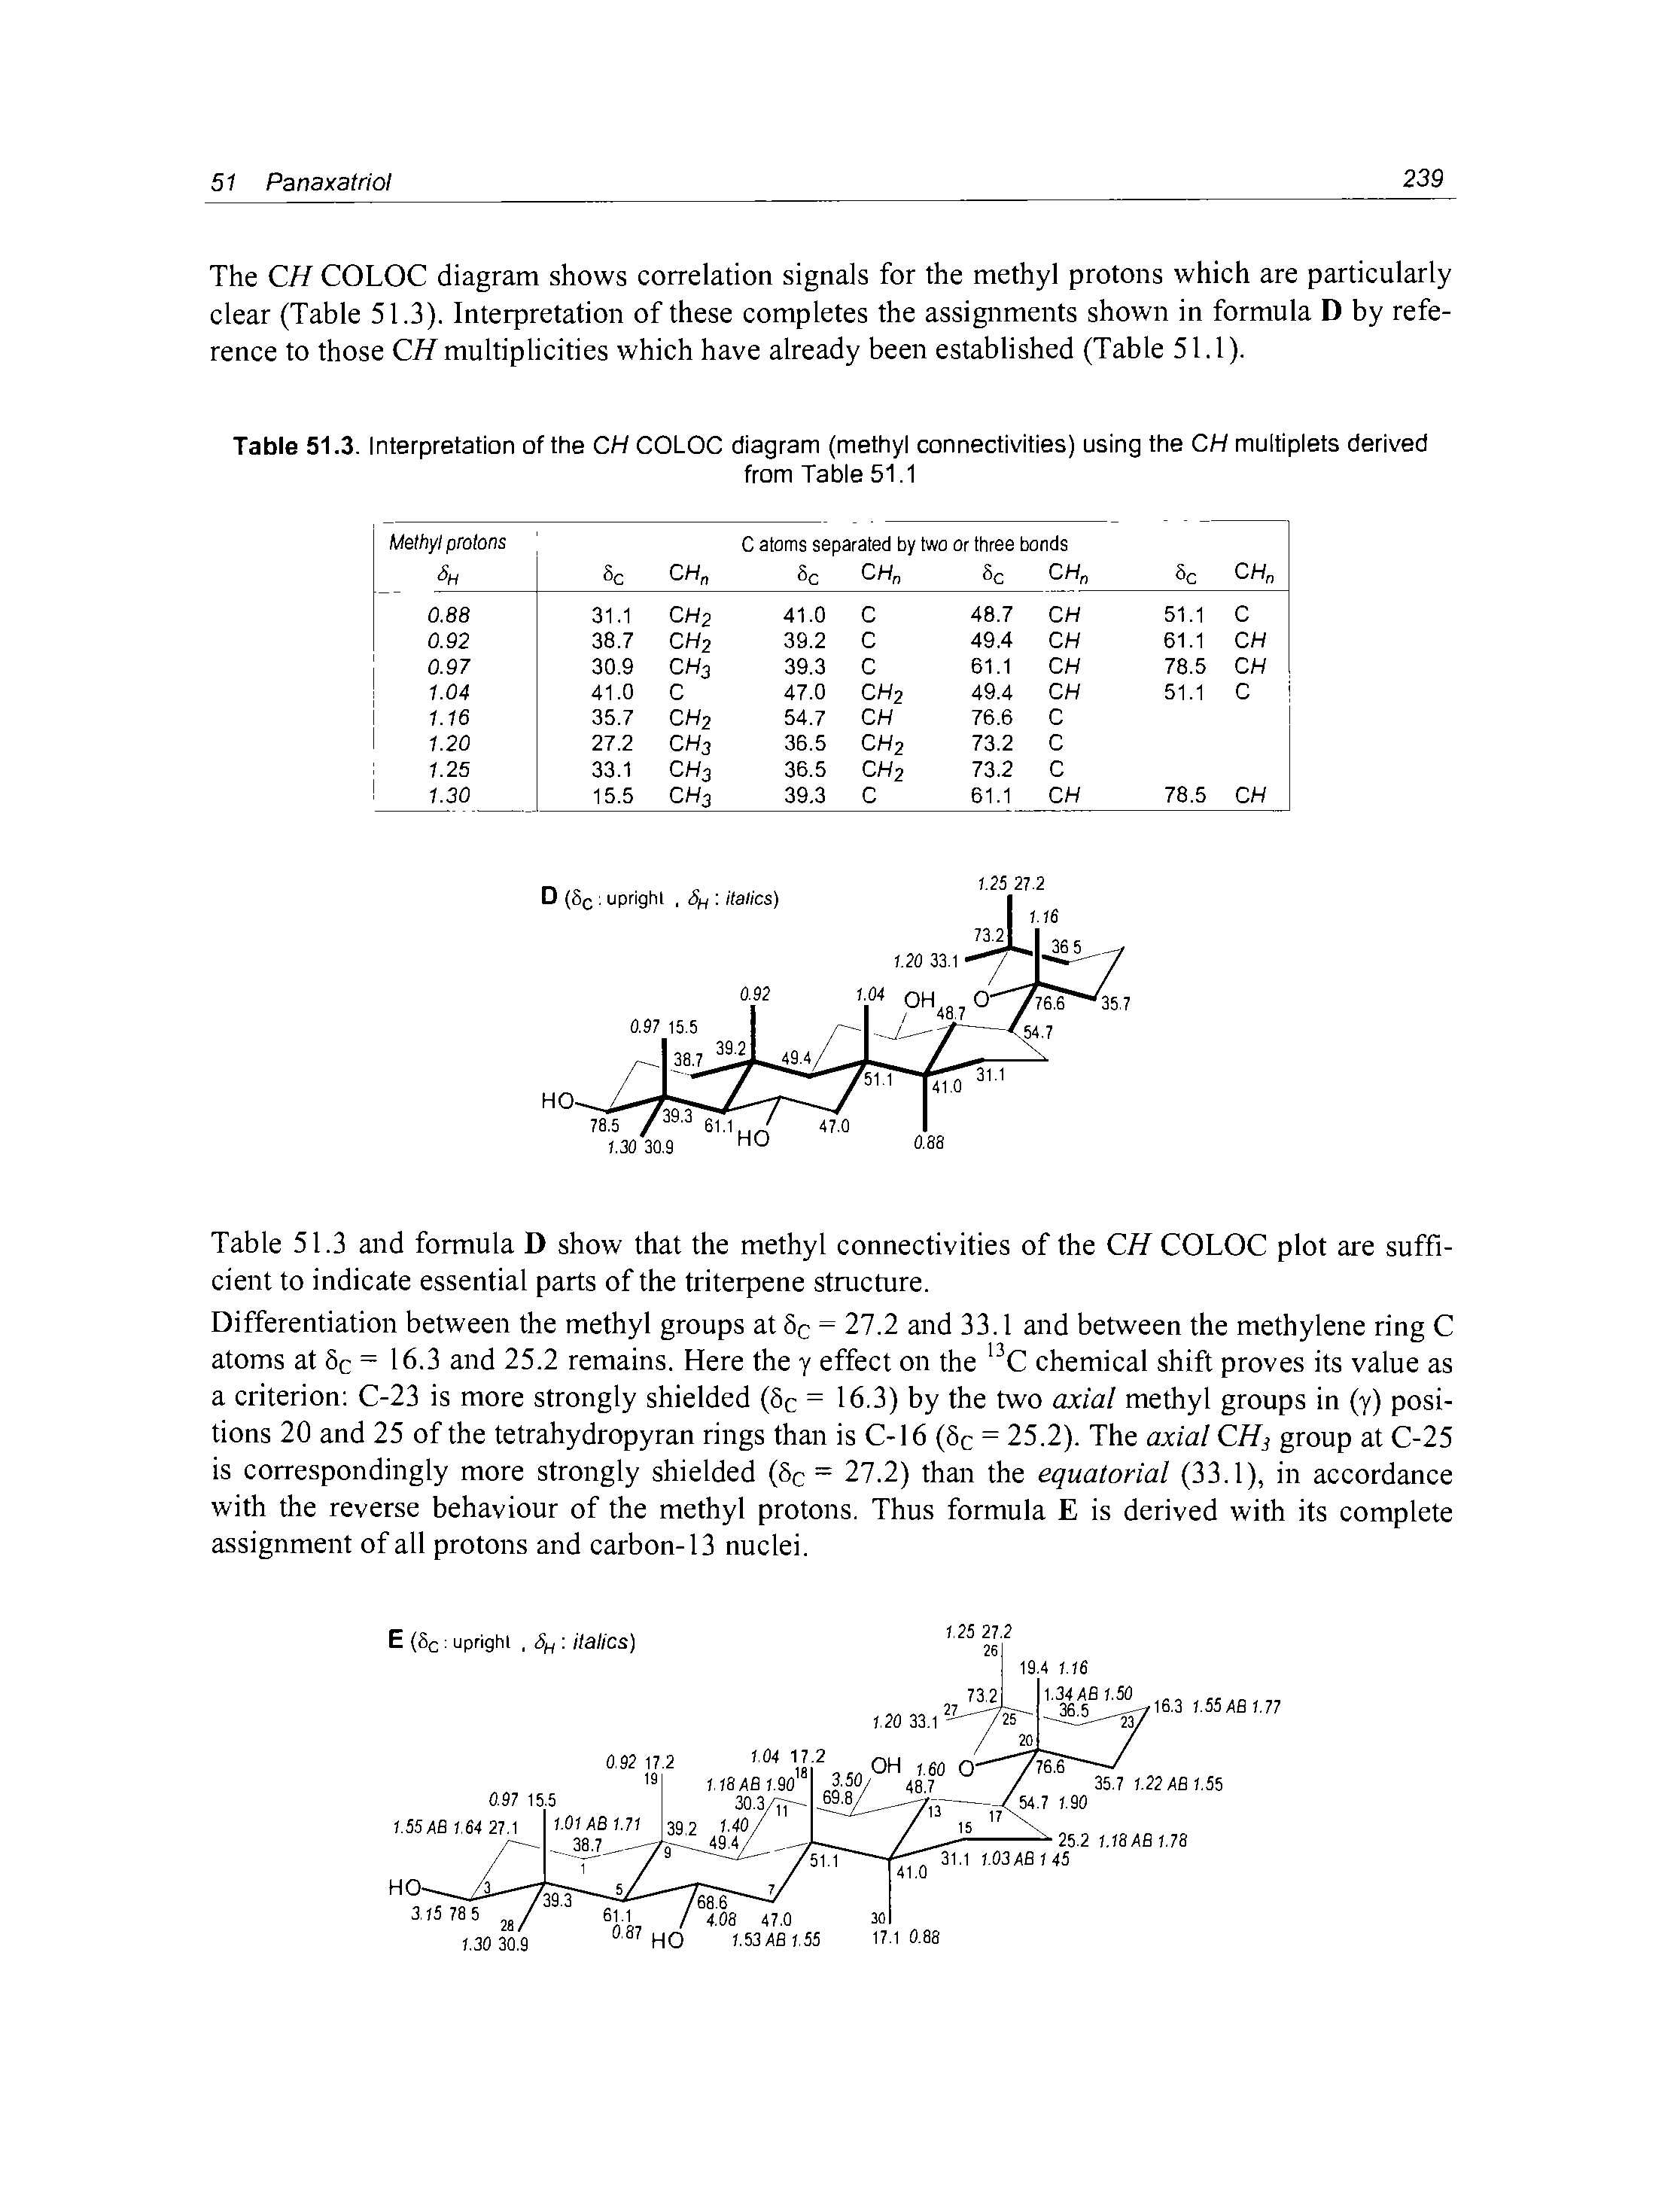 Table 51.3. Interpretation of the CH COLOC diagram (methyl connectivities) using the CH multiplets derived...